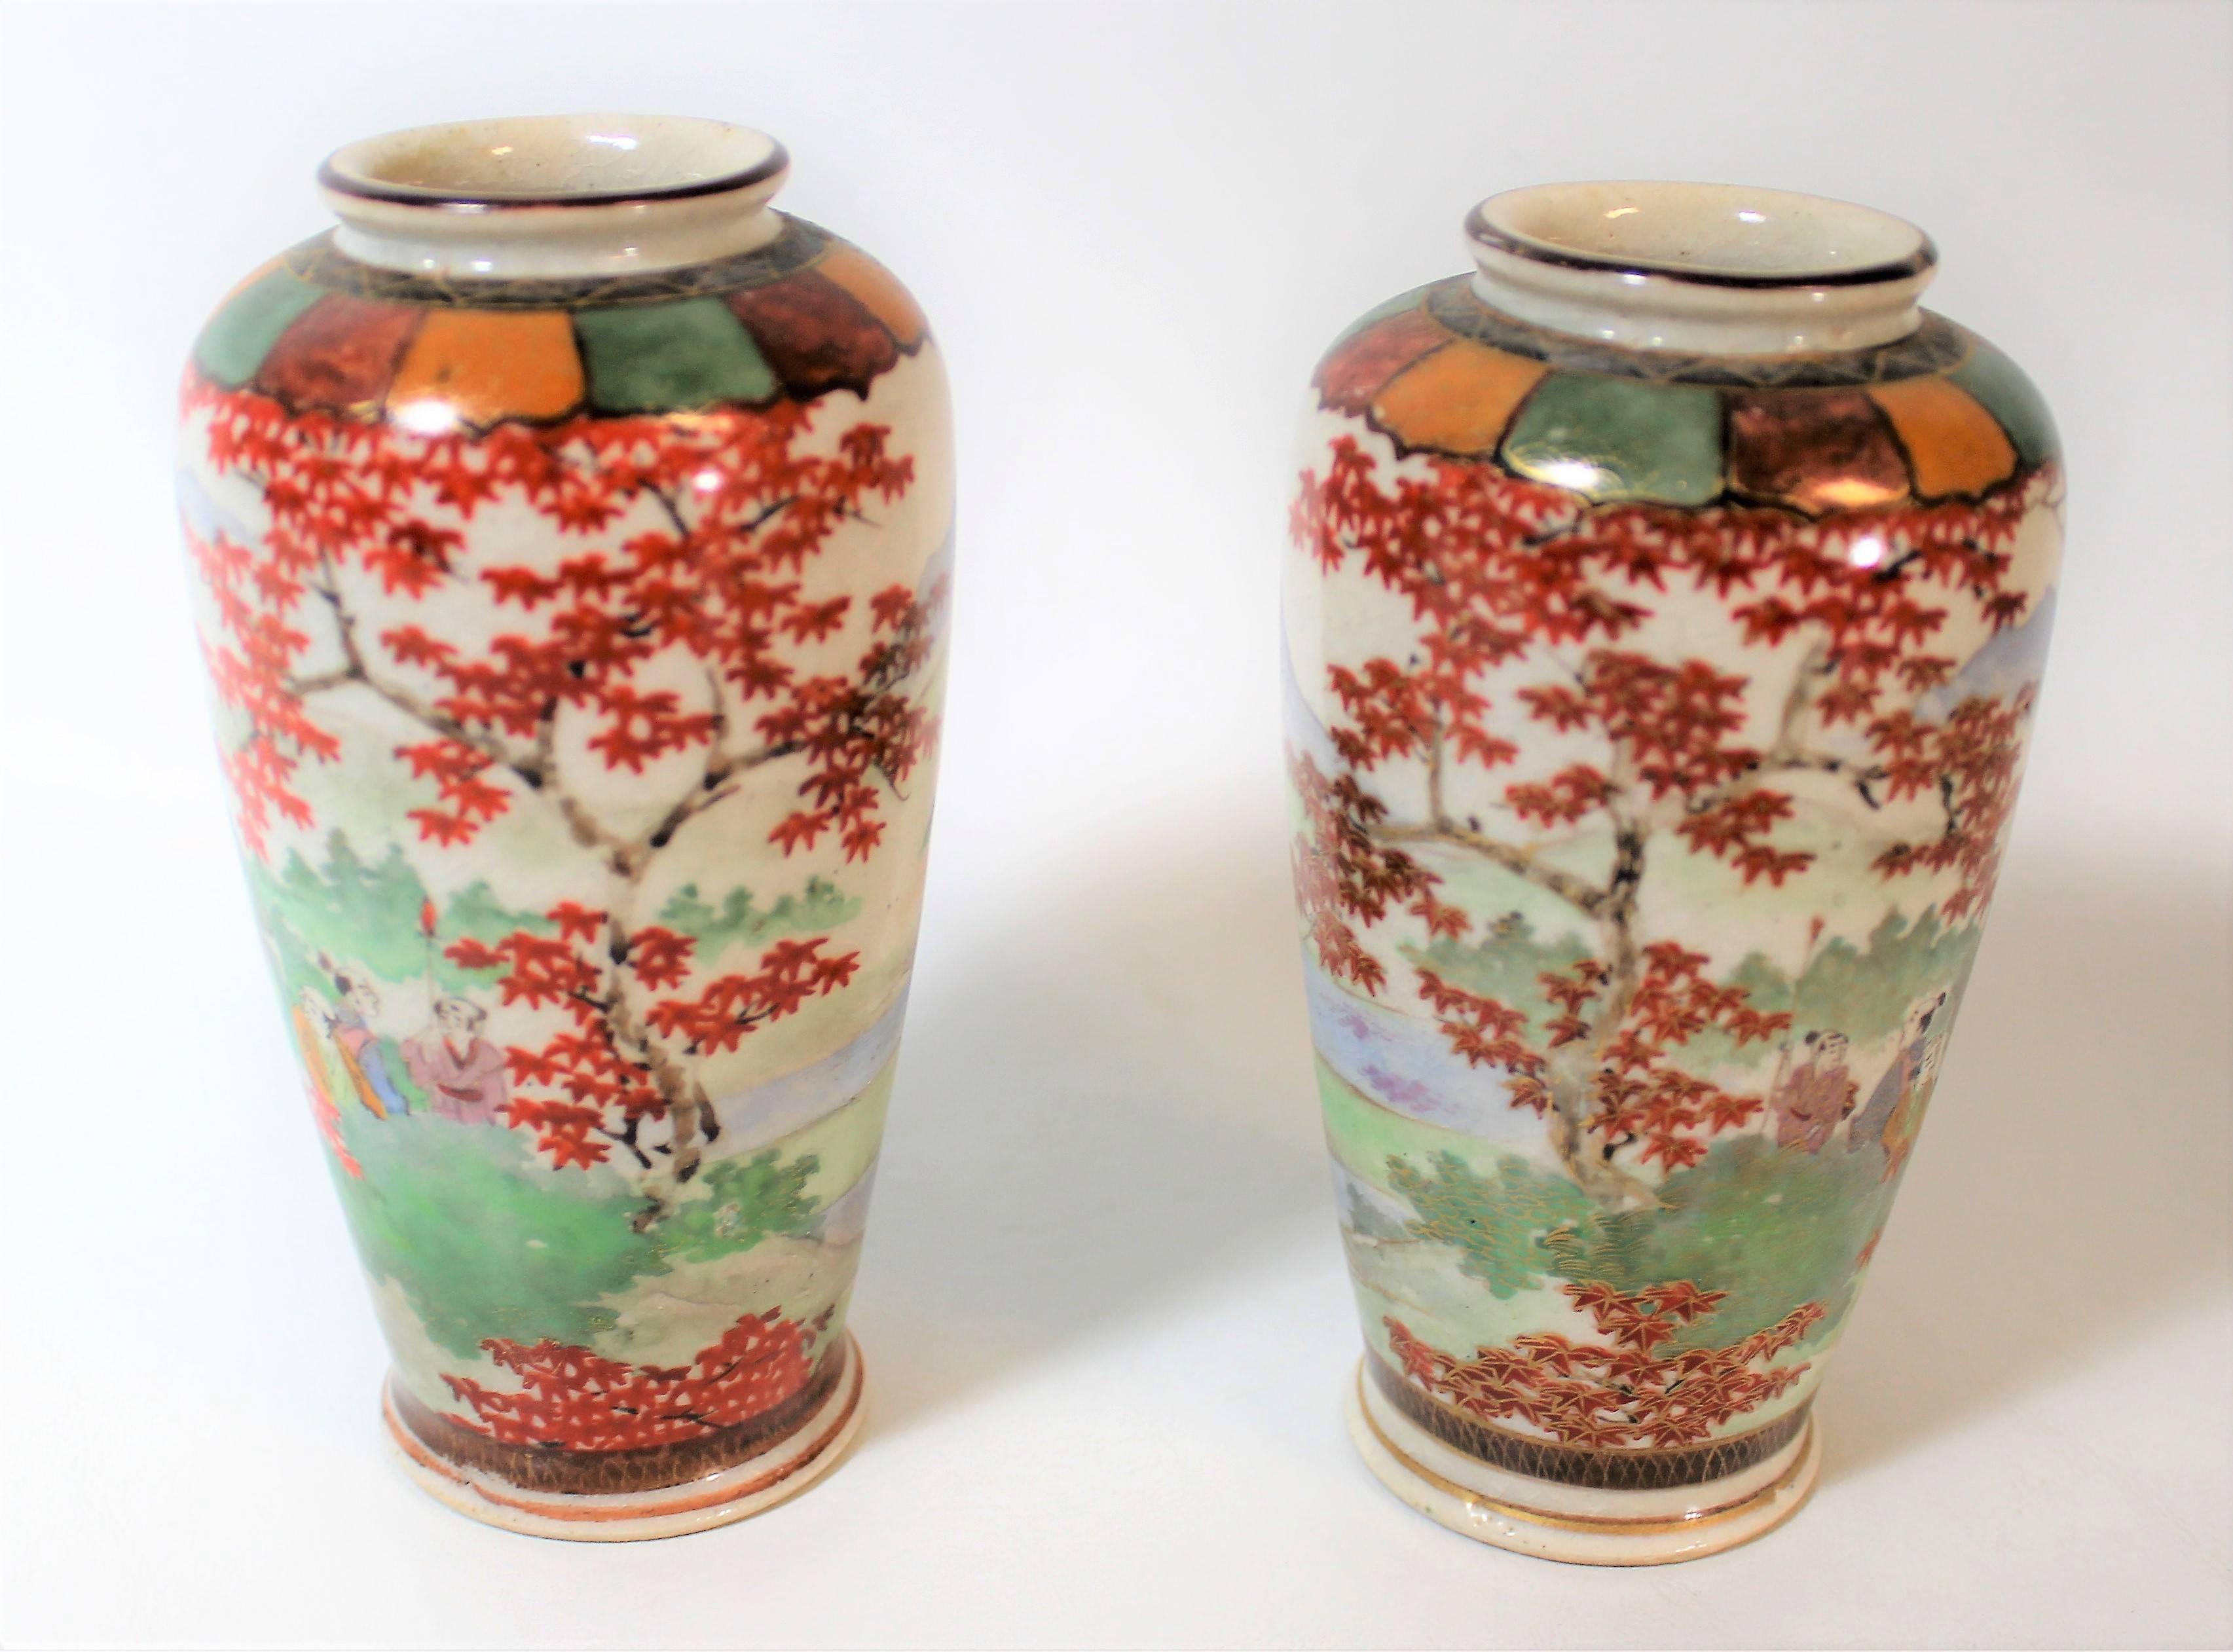 Pair of Japanese Meiji period hand-painted porcelain vases.